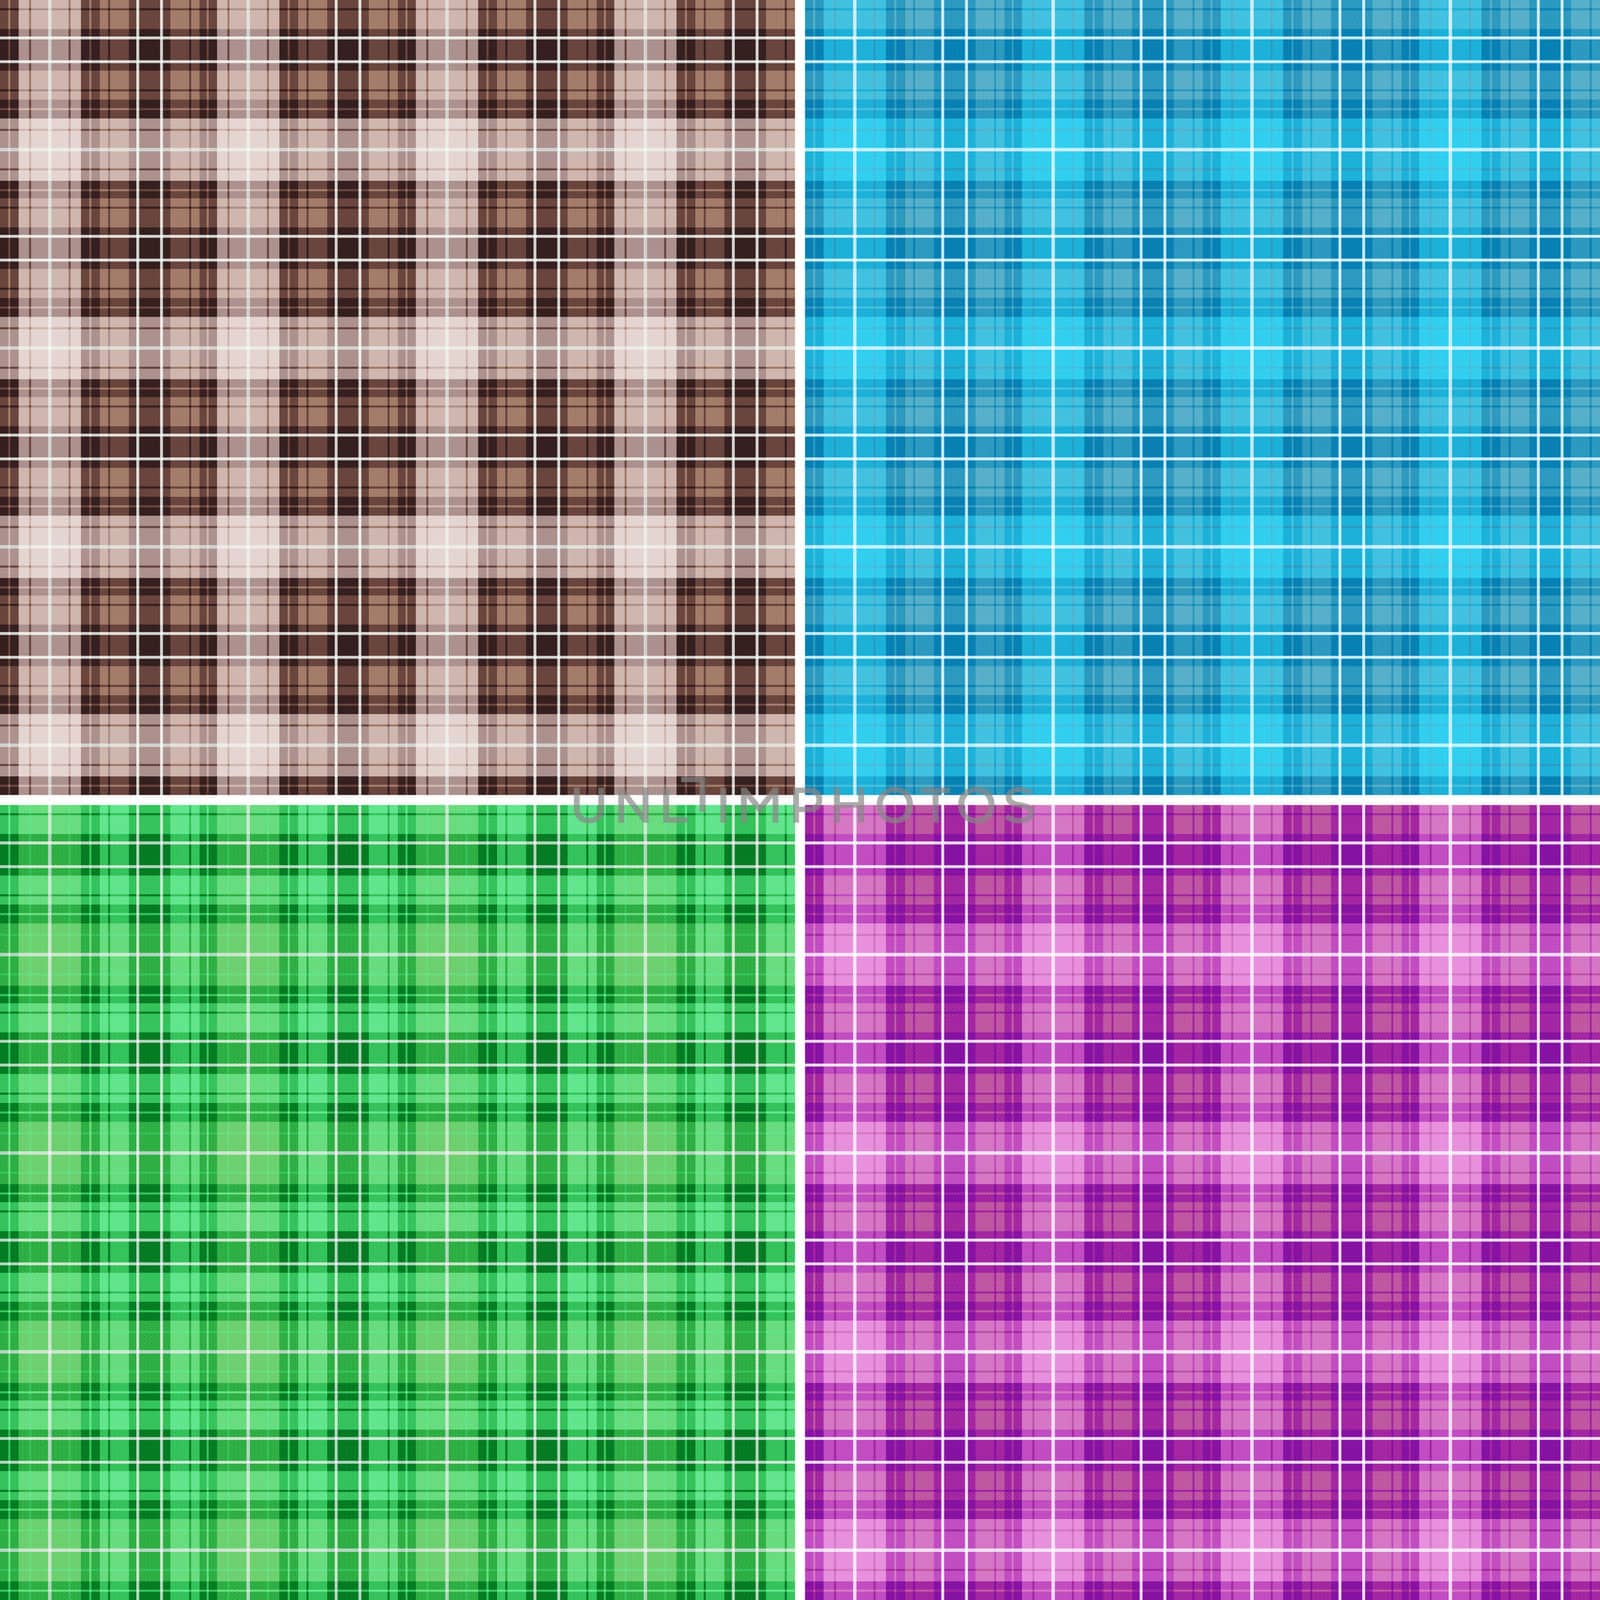 Fabric patterns by antkevyv